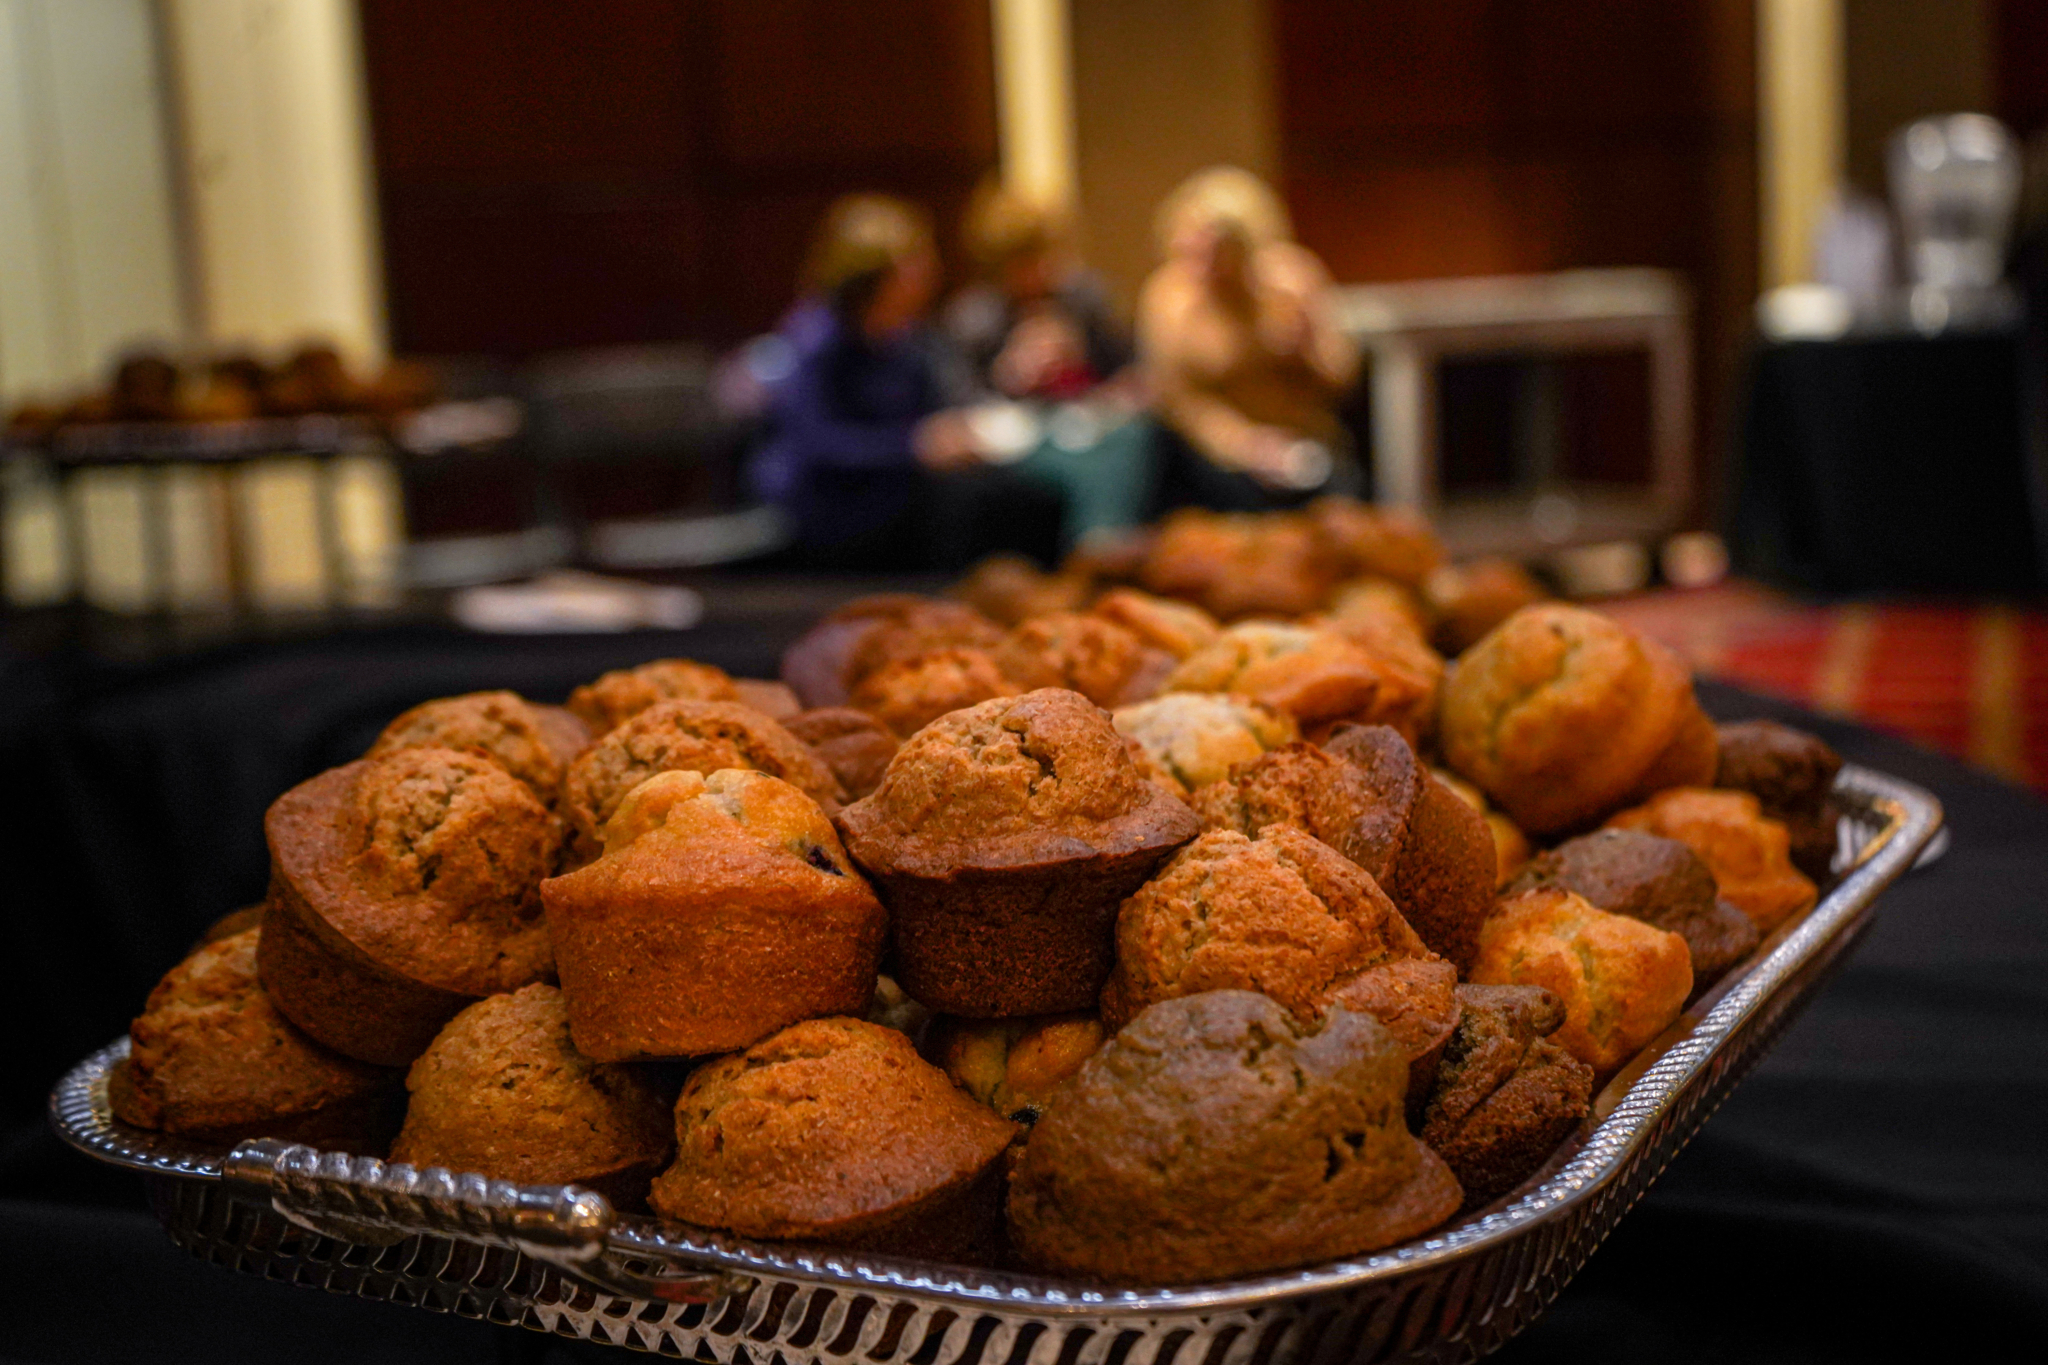 Muffins at an ASO Coffee Concert